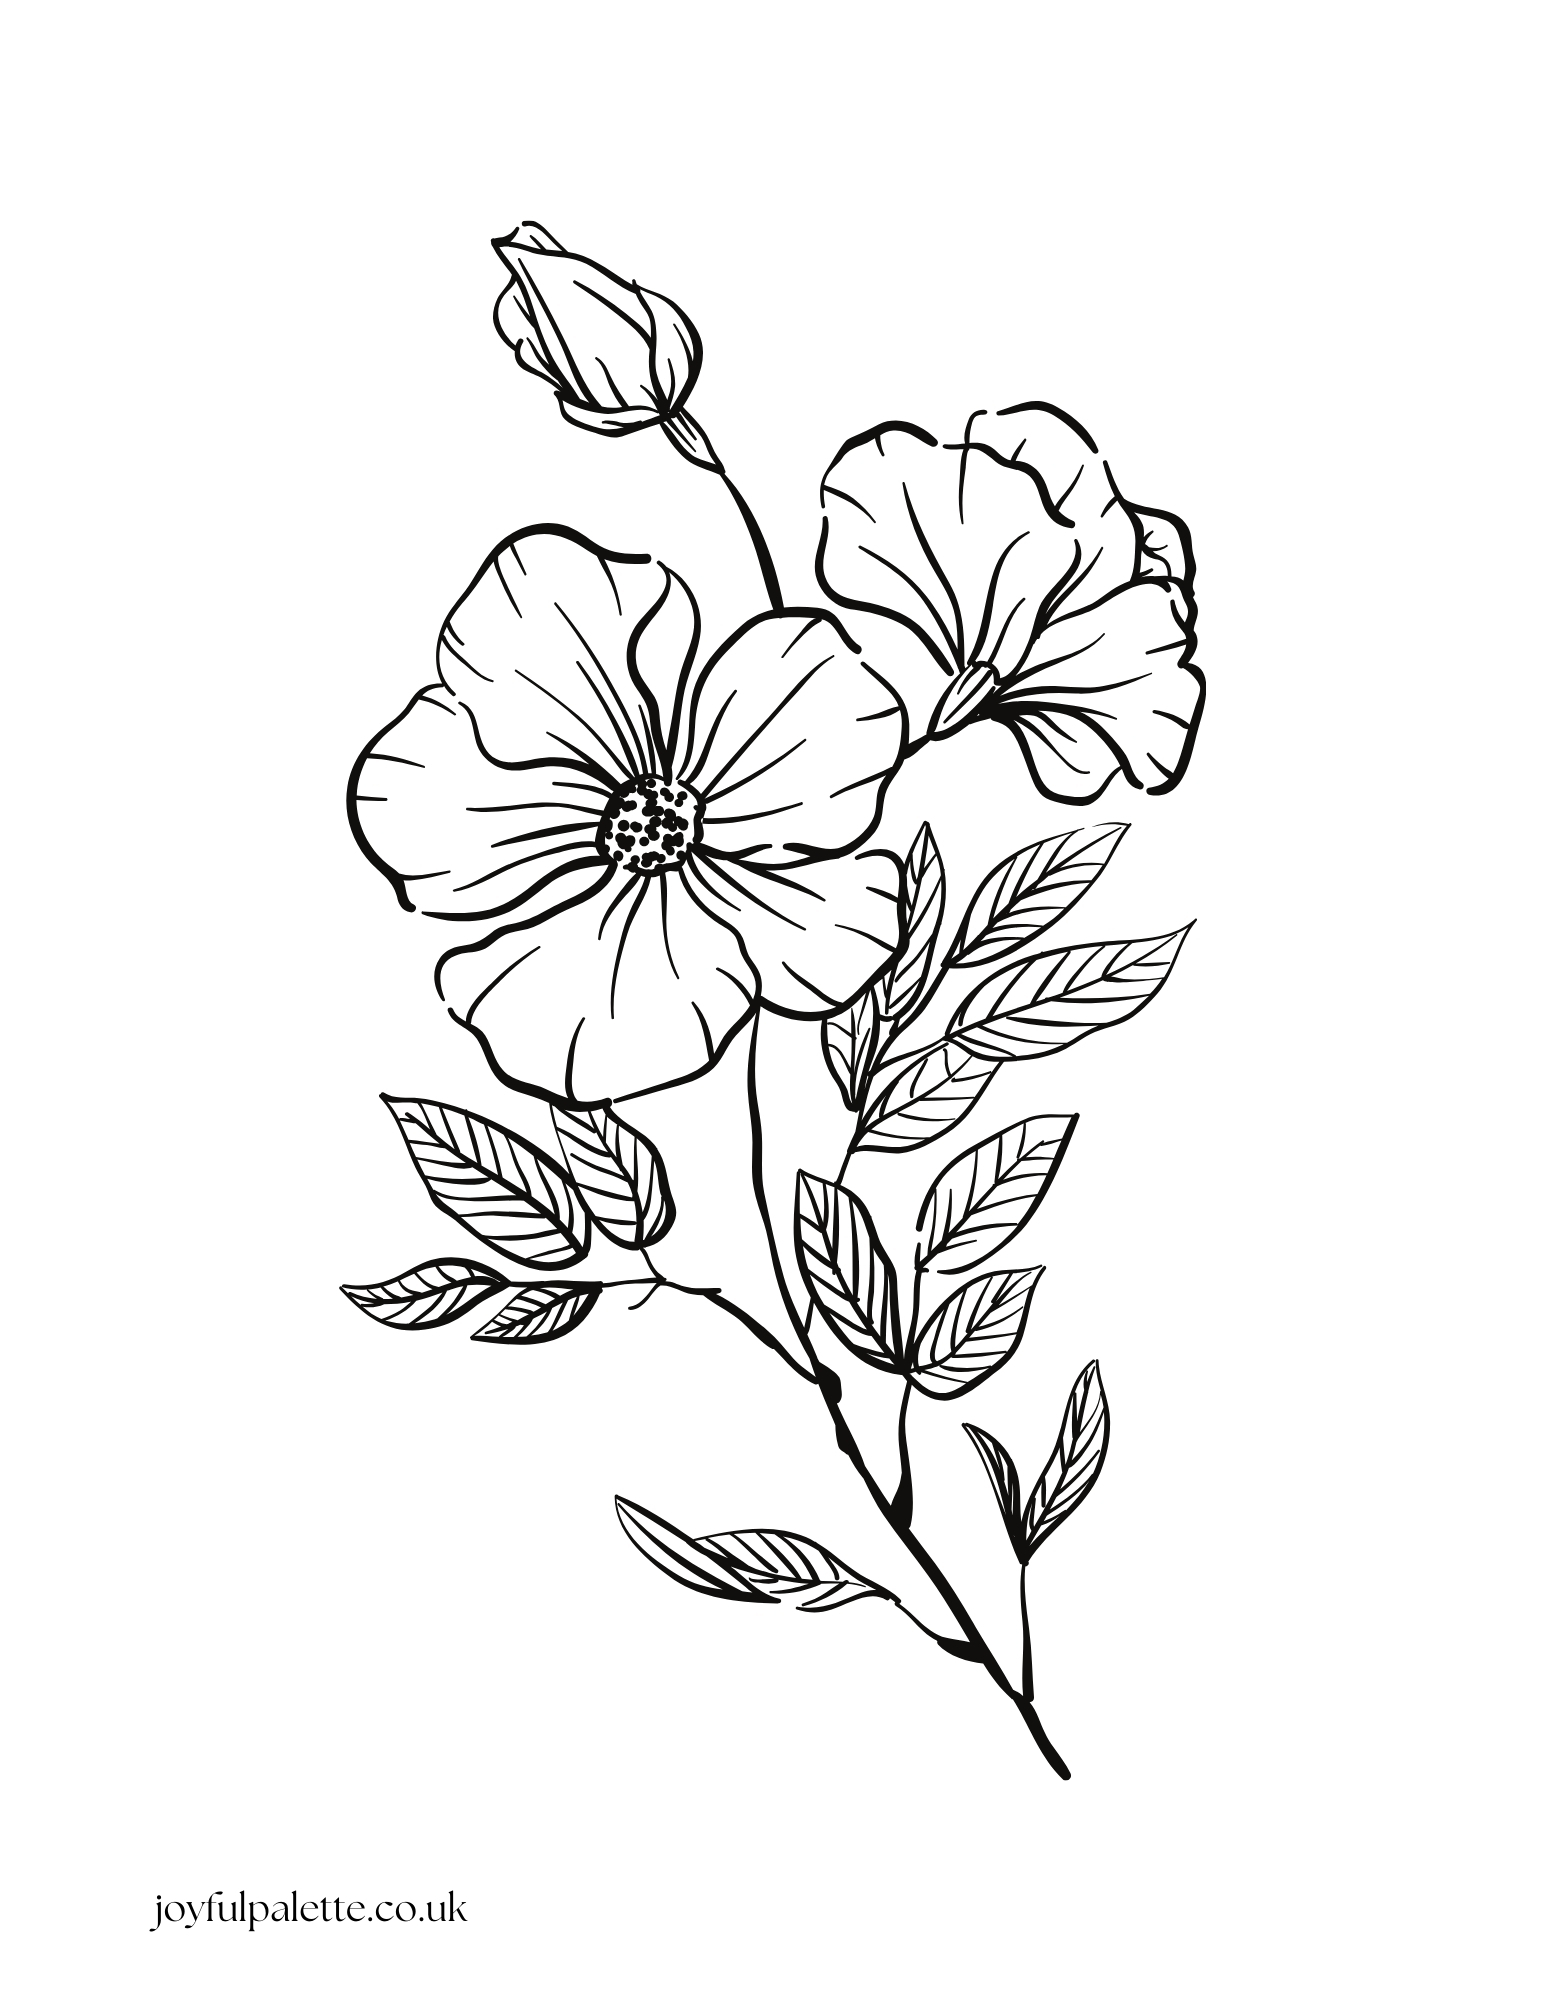 Big Flower Coloring Page